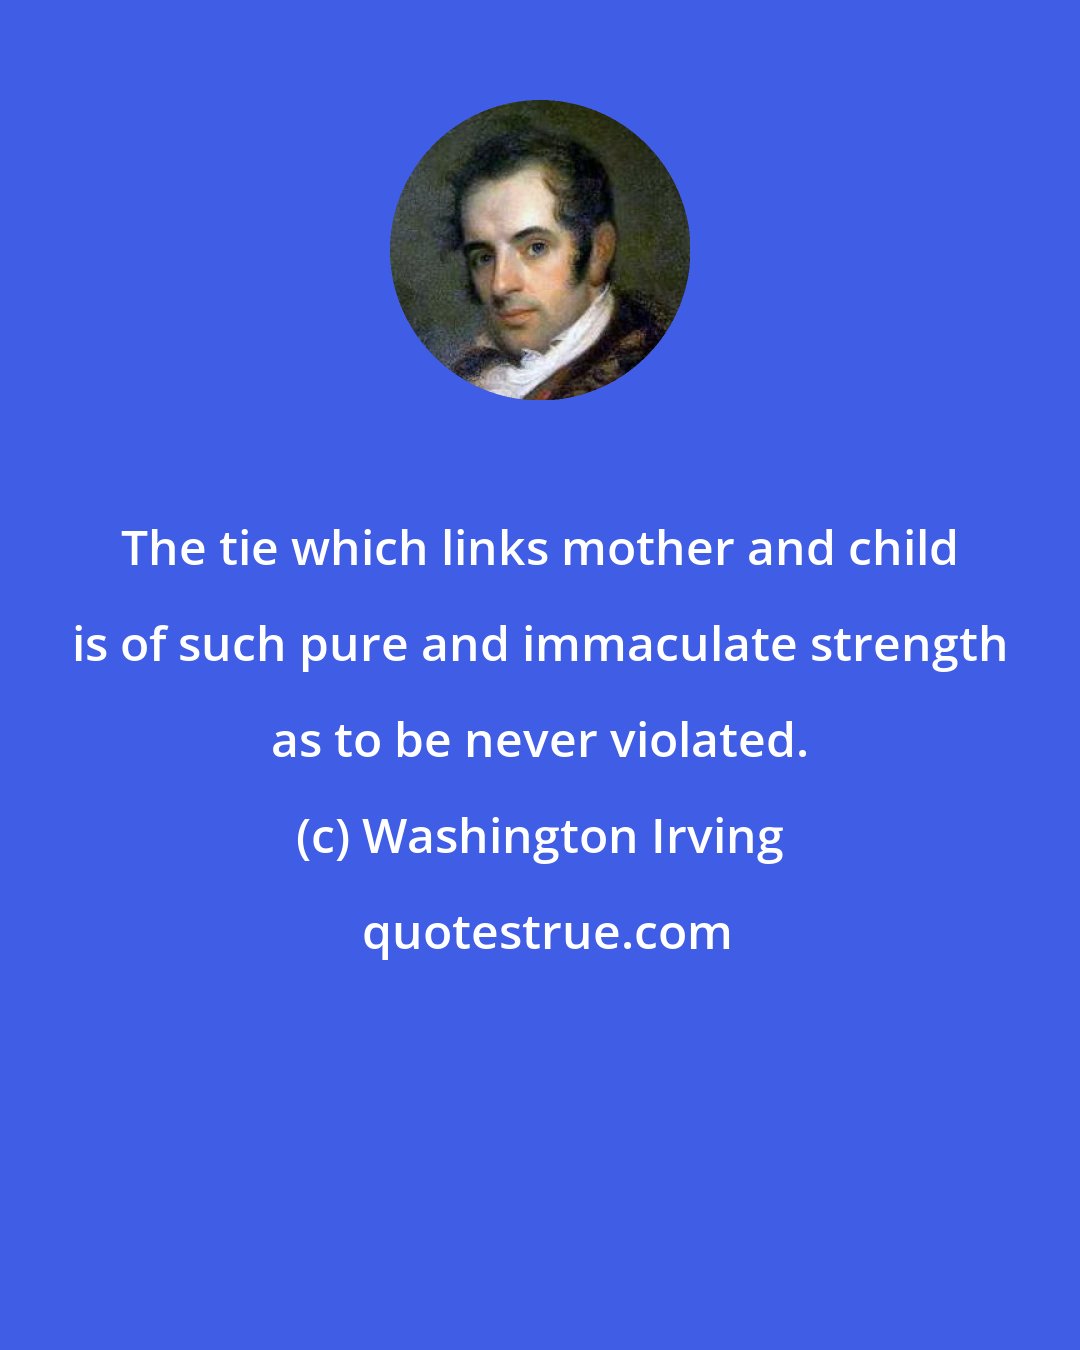 Washington Irving: The tie which links mother and child is of such pure and immaculate strength as to be never violated.